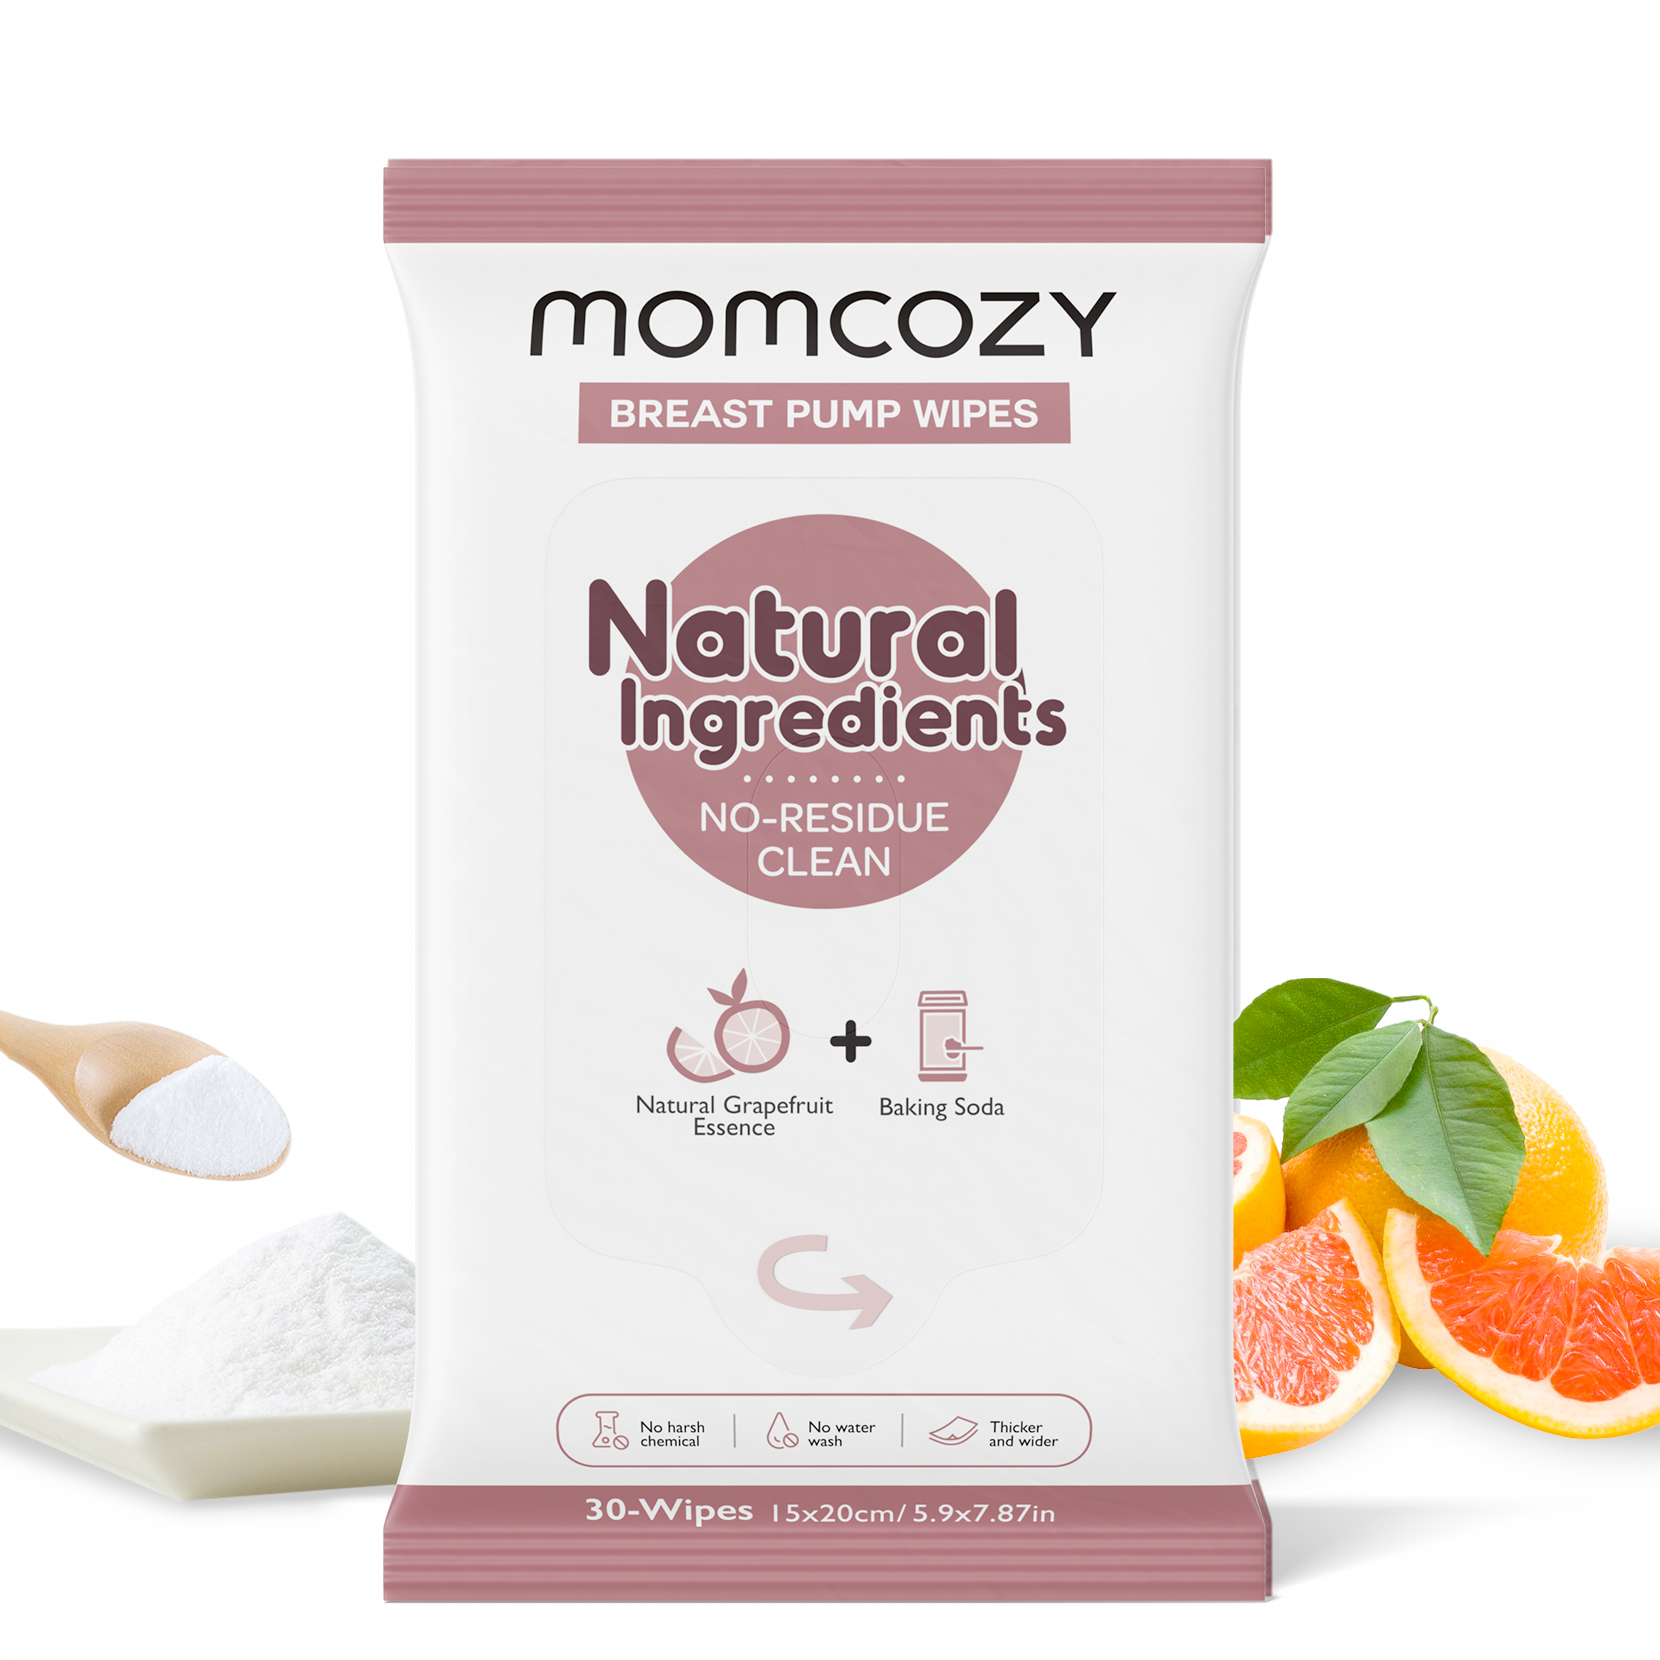 Momcozy Natural Breast Pump Wipes 30 Ct - image 1 of 8